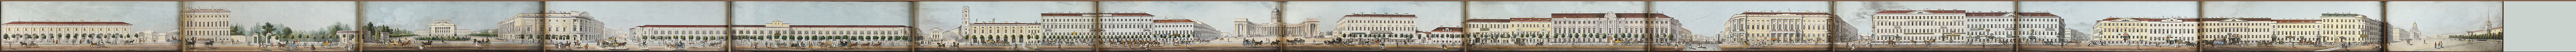 Part of a 14-panel panorama etching of 17th-century buildings in St. Petersburg, Russia